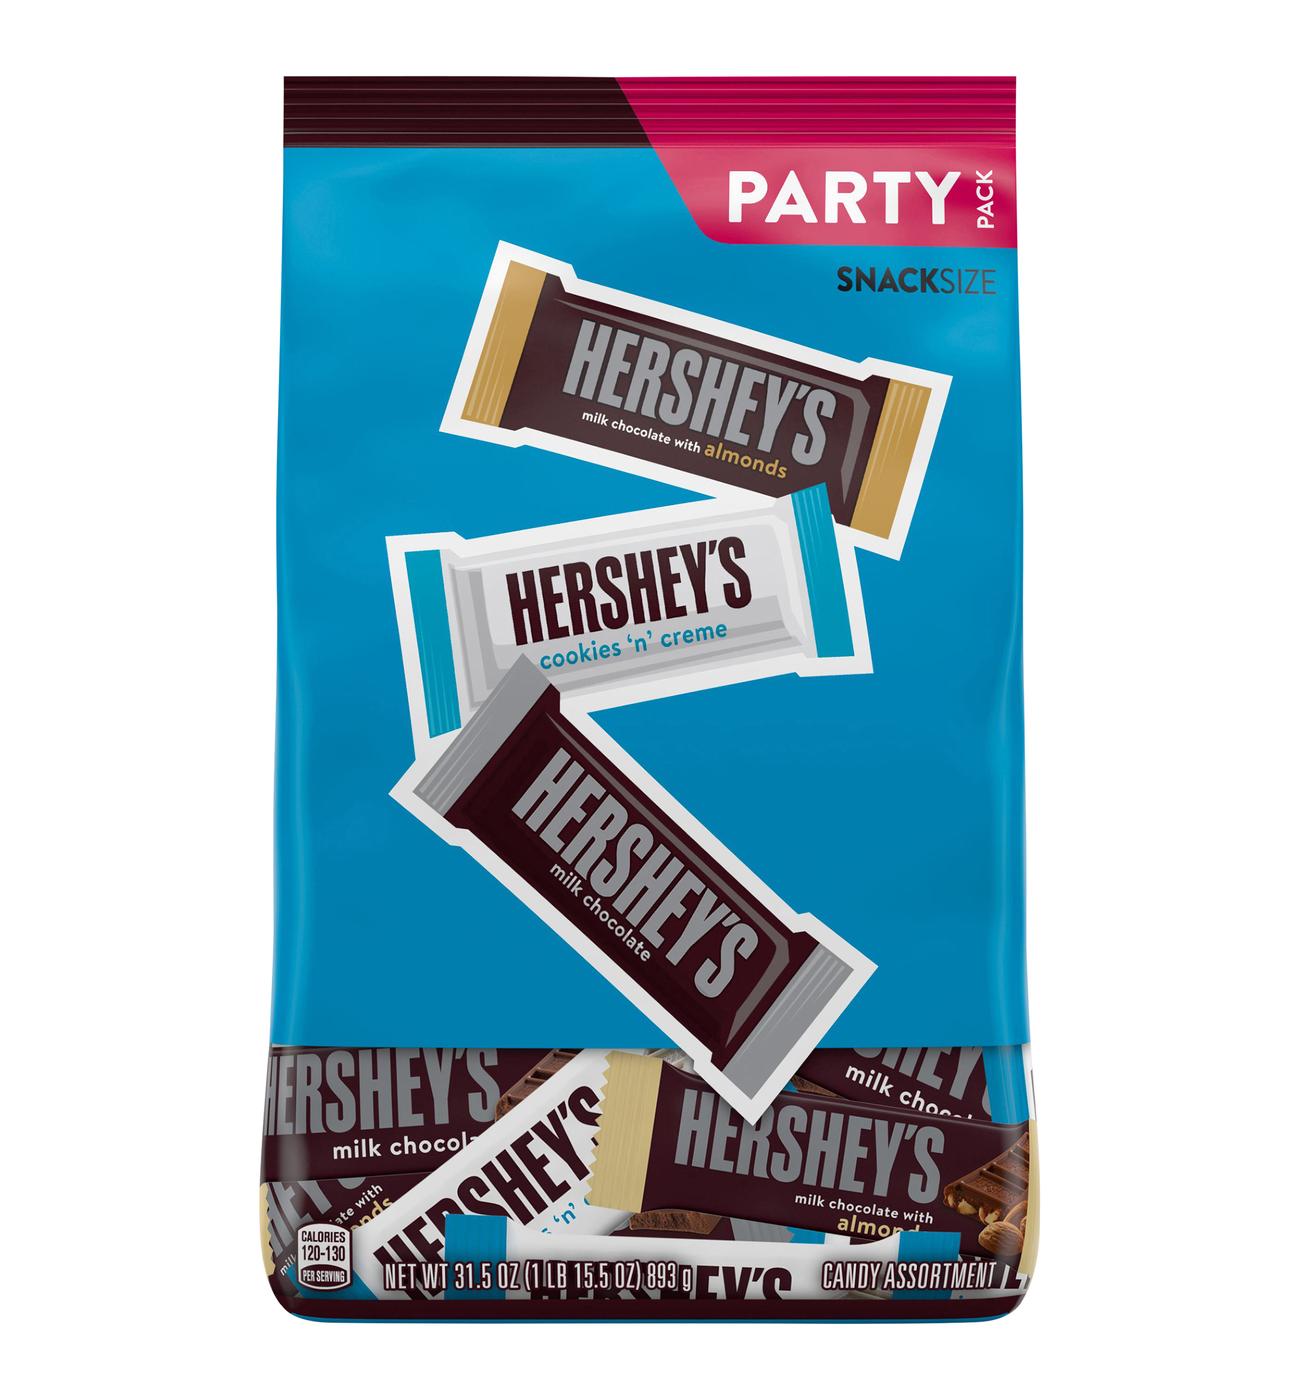 Hershey's Assorted Snack Size Chocolate Candy - Party Pack; image 1 of 7